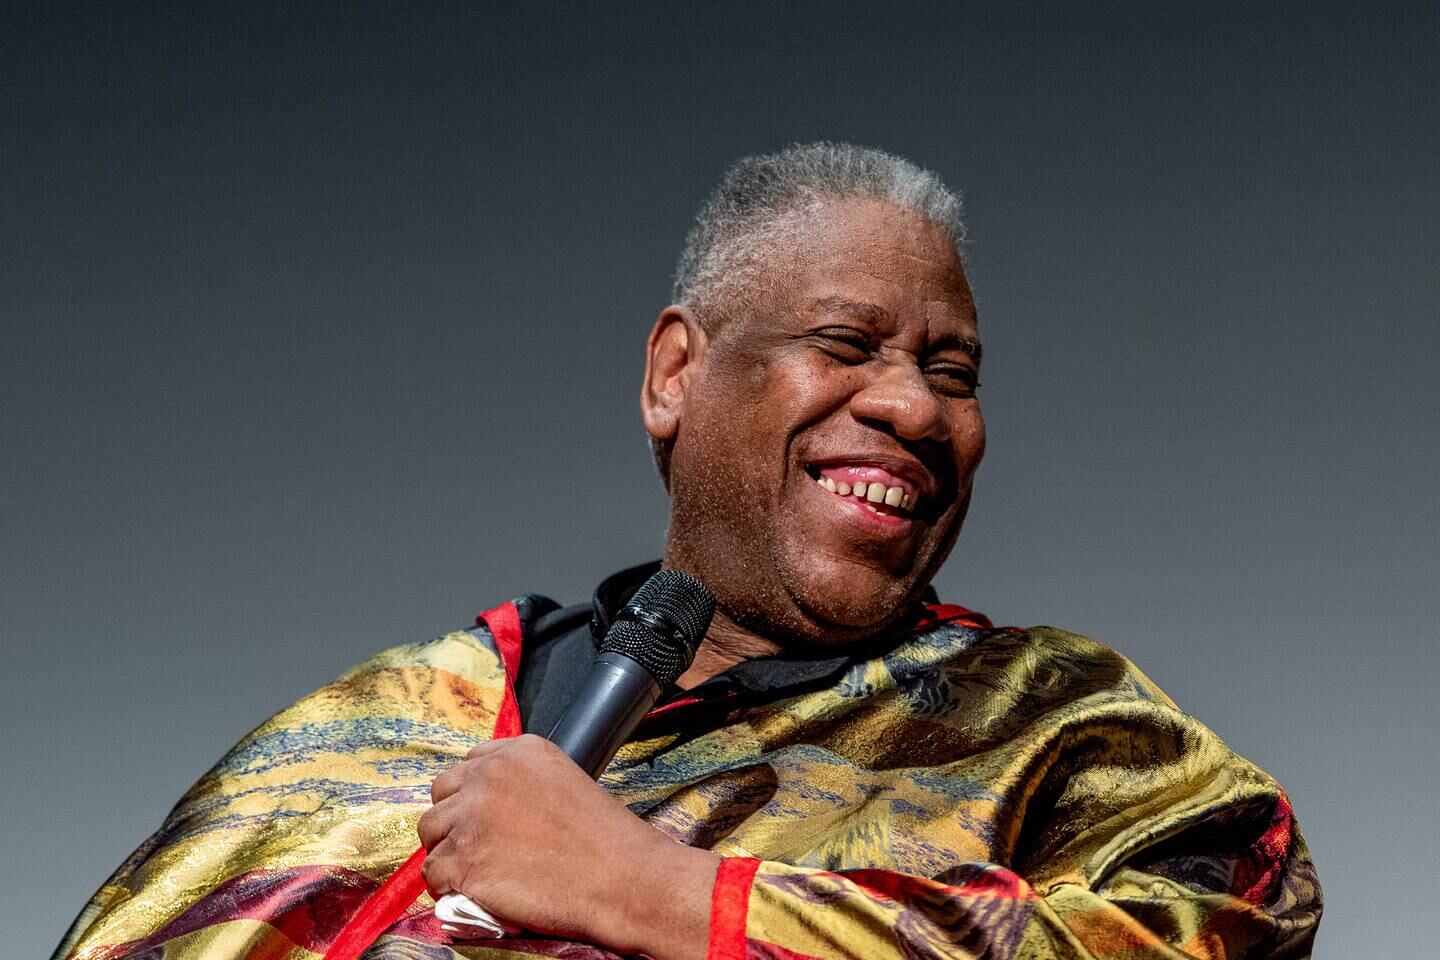 Andre Leon Talley attends "The Gospel According To Andre" premiere at the Tribeca Film Festival in 2018. Getty Images.